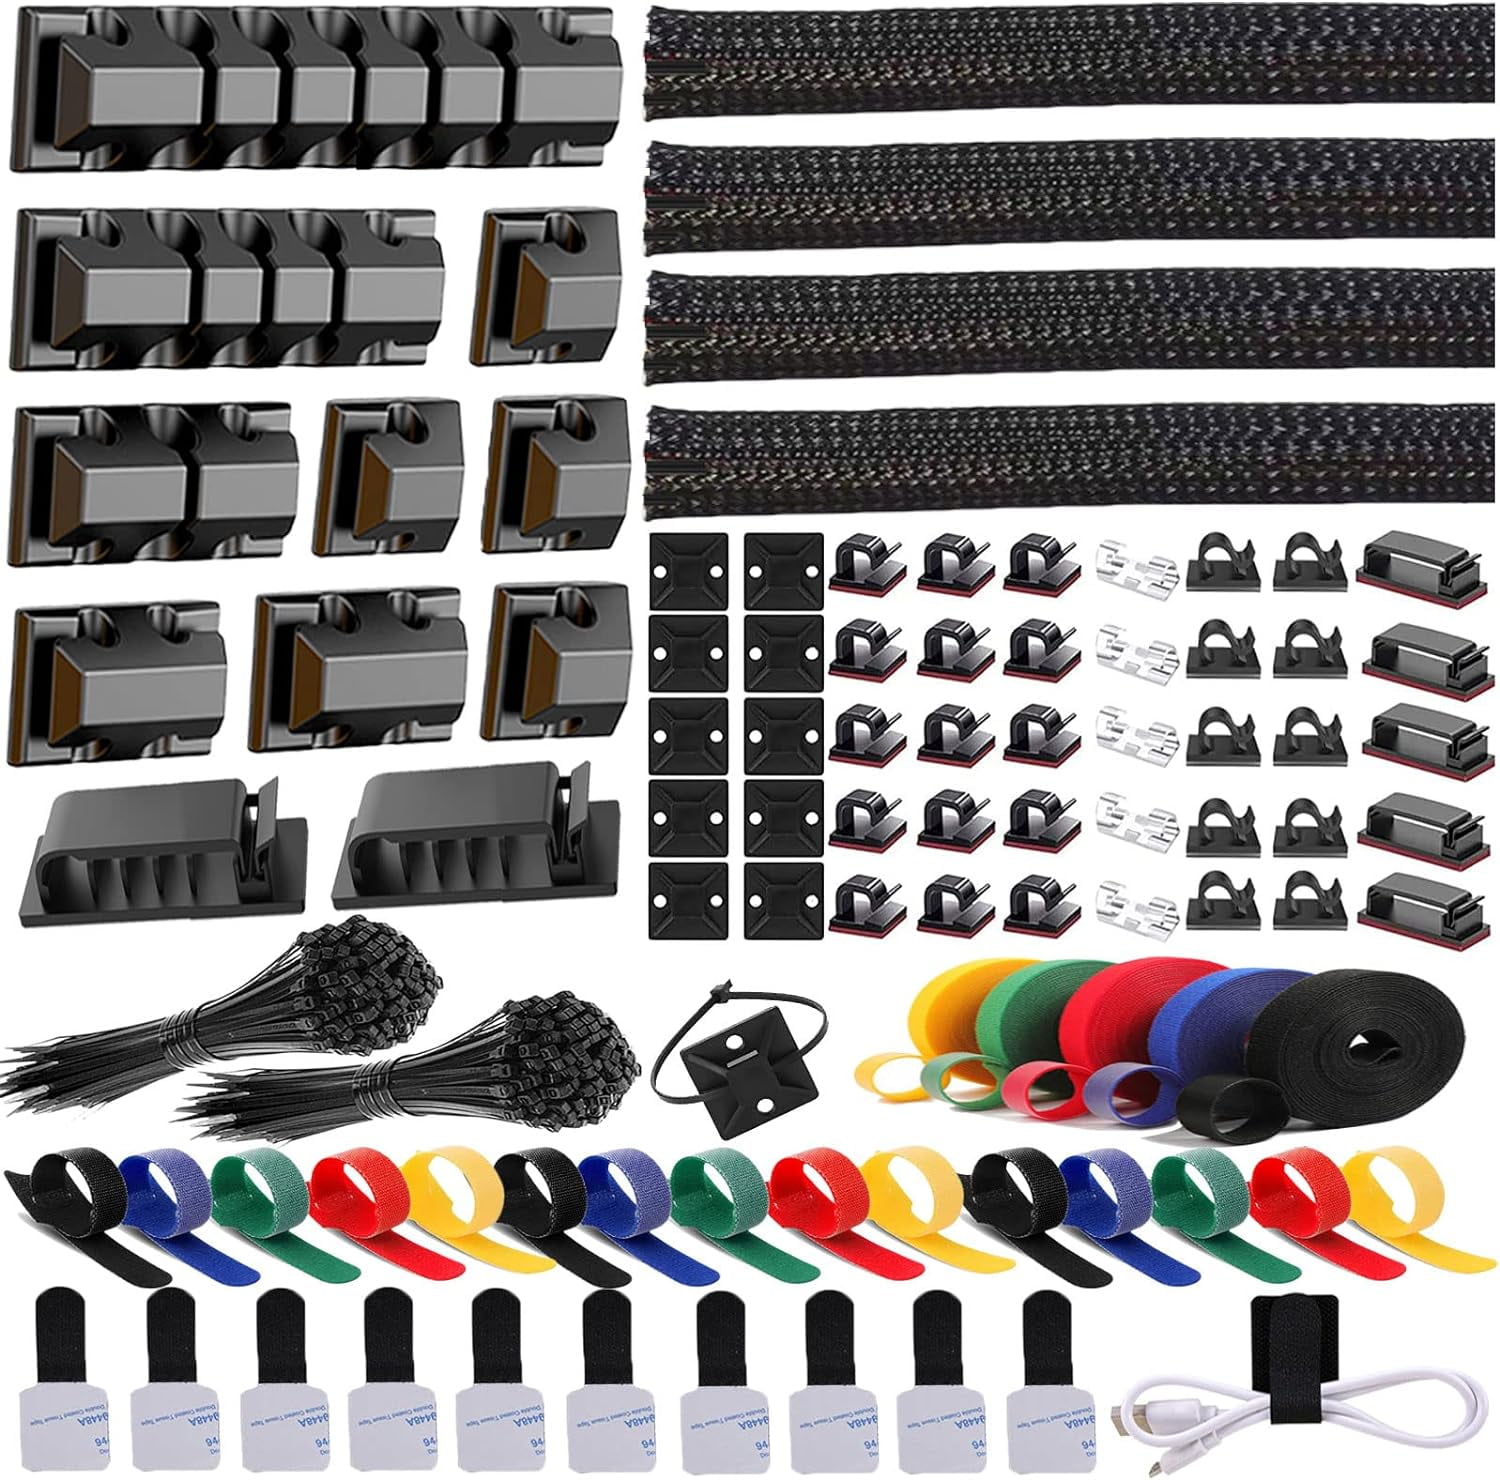 36 Pcs Self Adhesive Cable Clips,Cable Stick Clips Holder Self Stick  Durable Practical Plastic Cord Management Organiser Clamps, Wire Clips for  Home